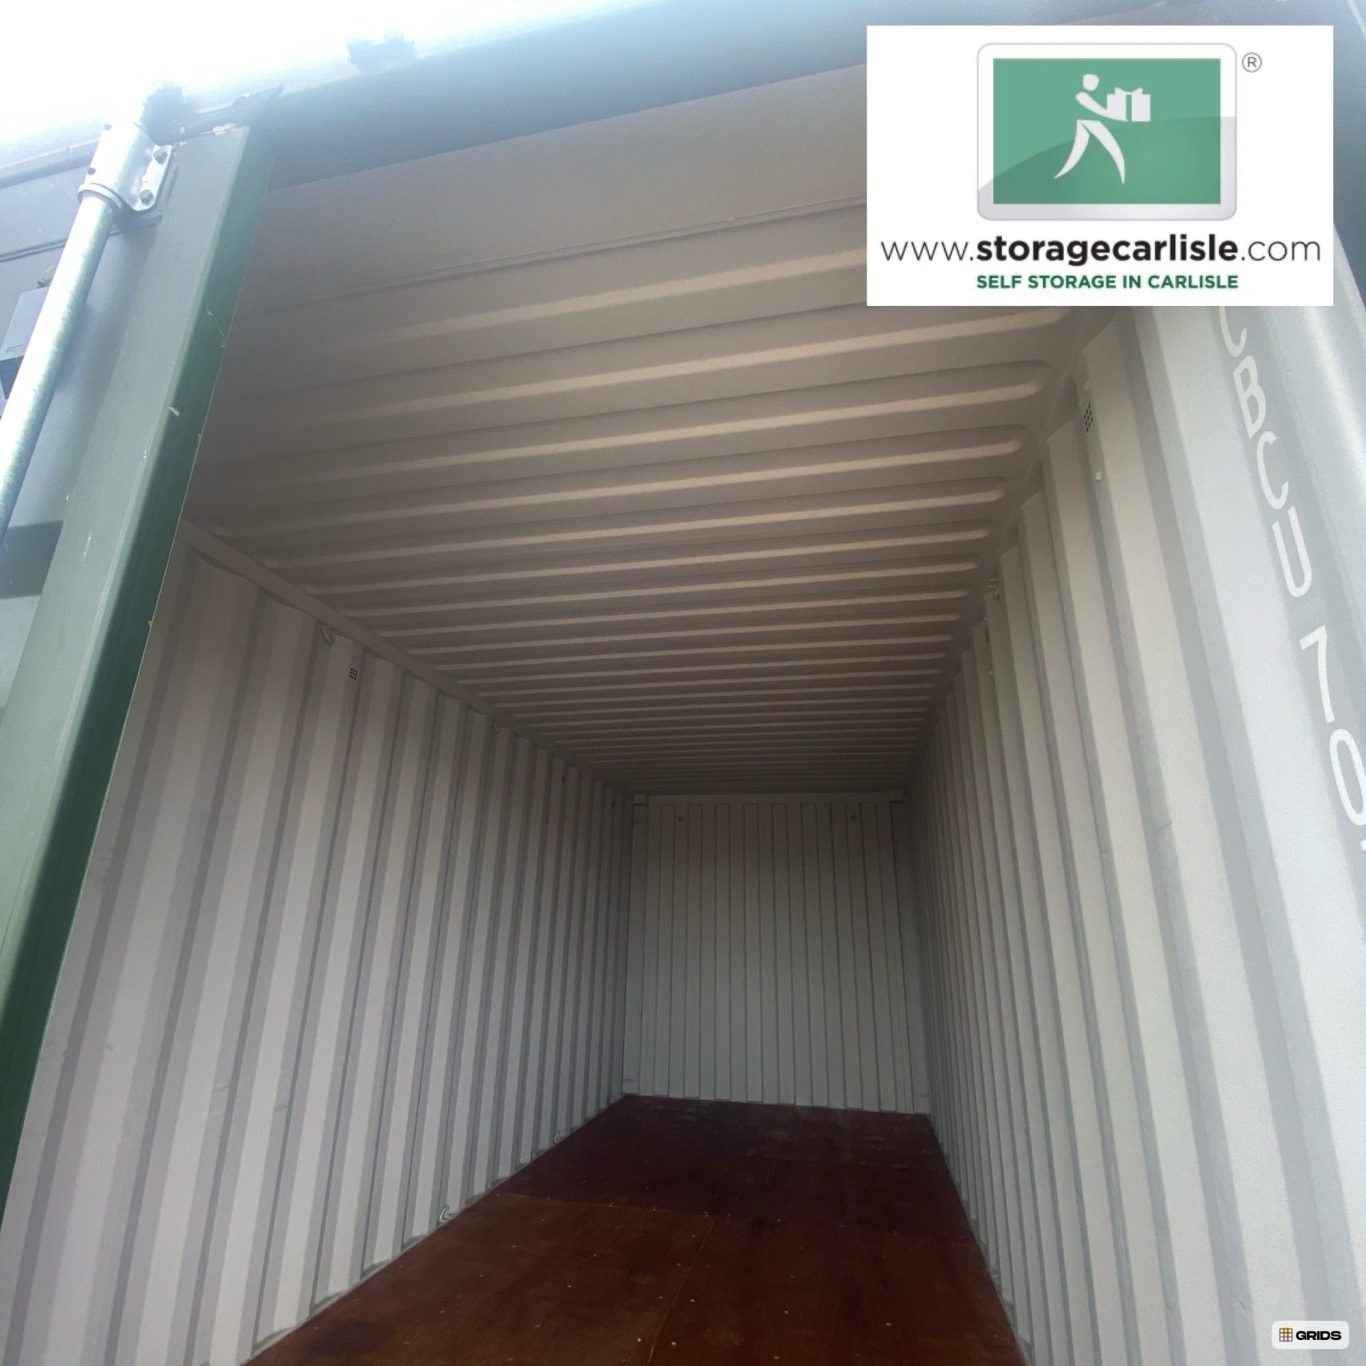 interior of 20 foot shipping container showing roof